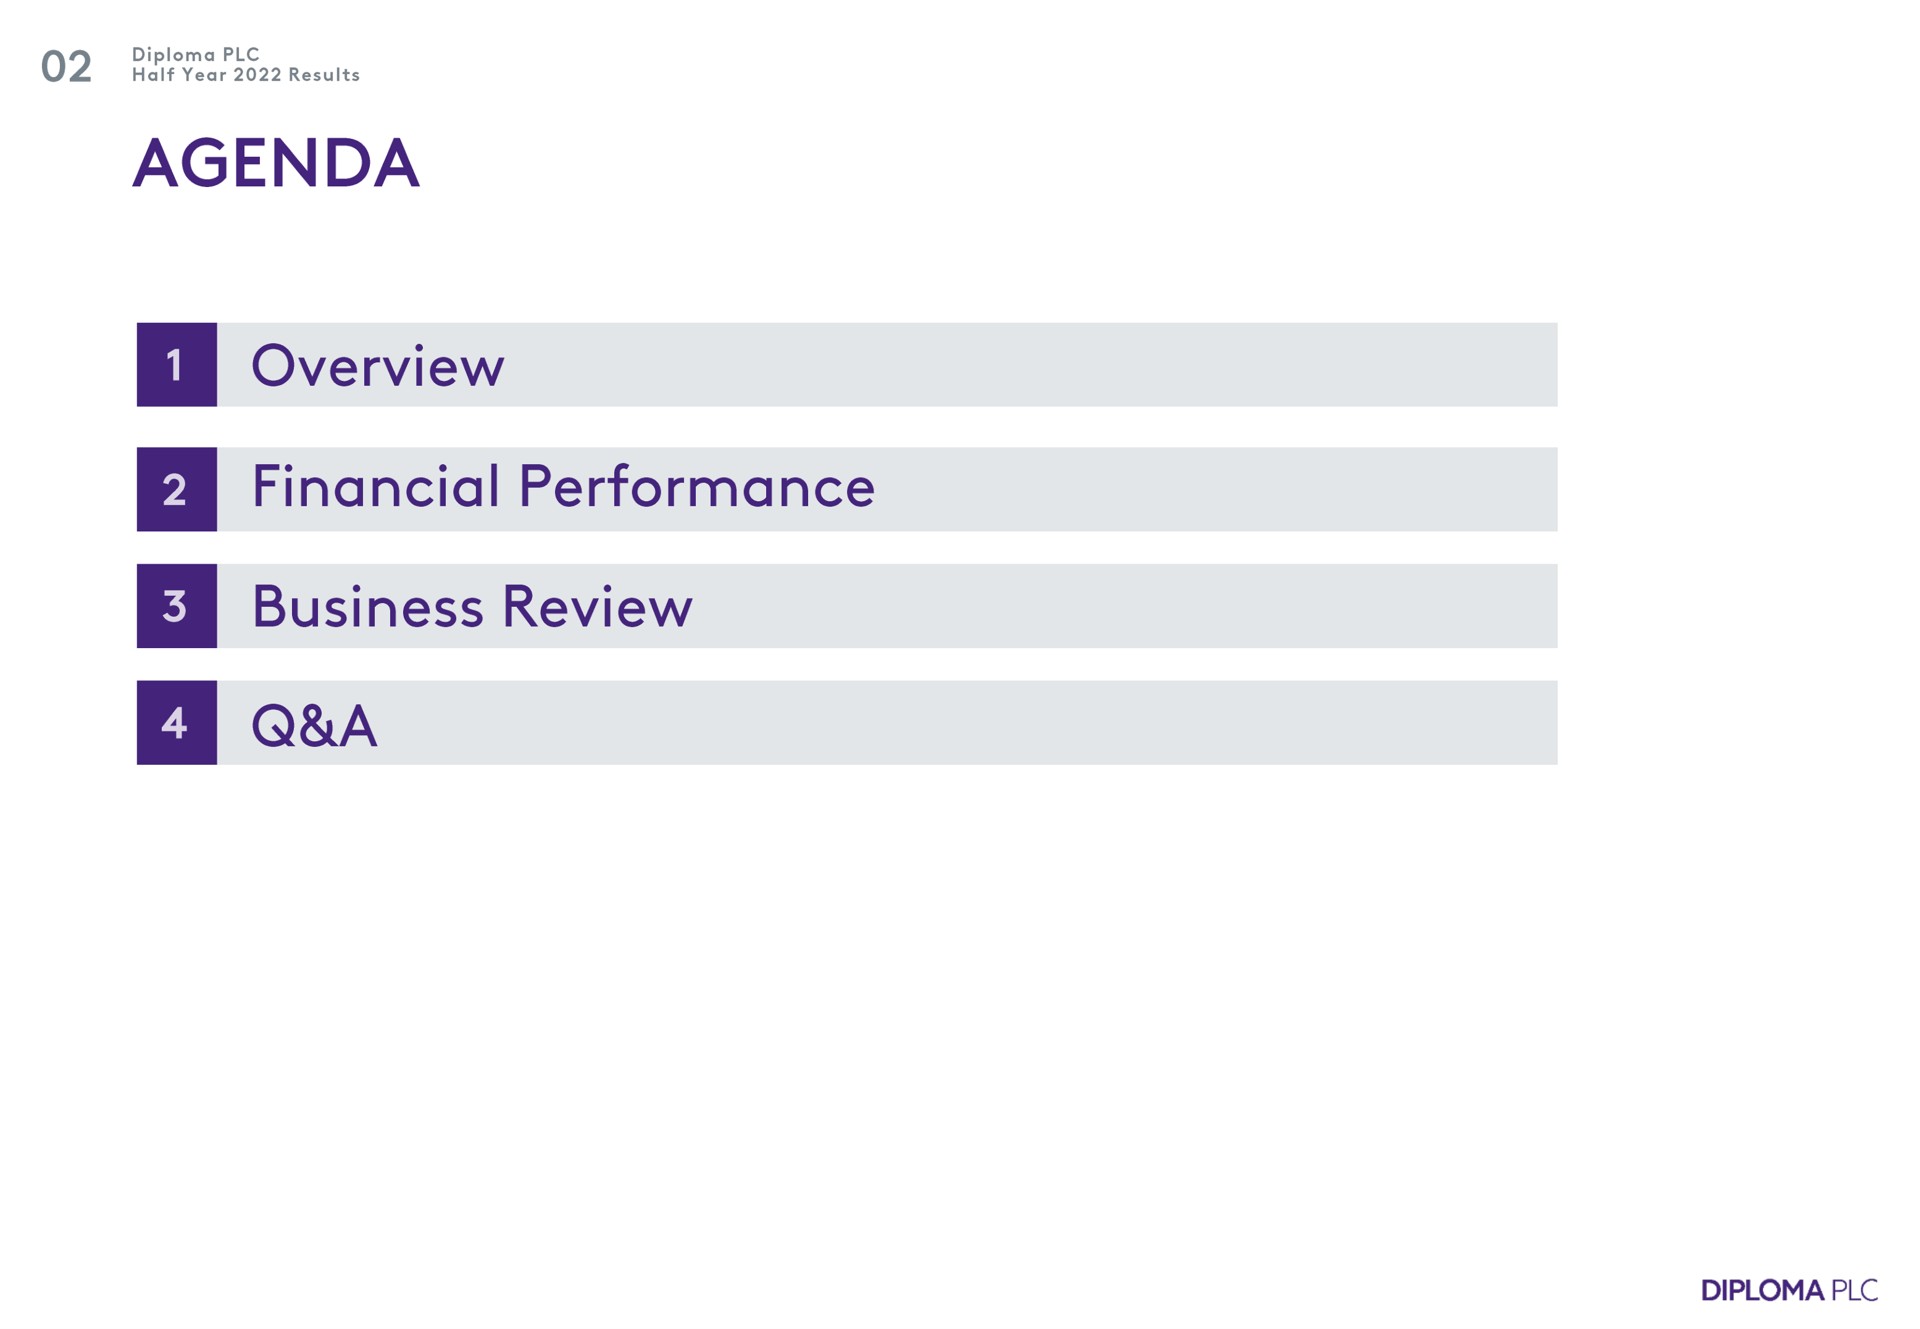 agenda a overview a financial performance business review a | Diploma